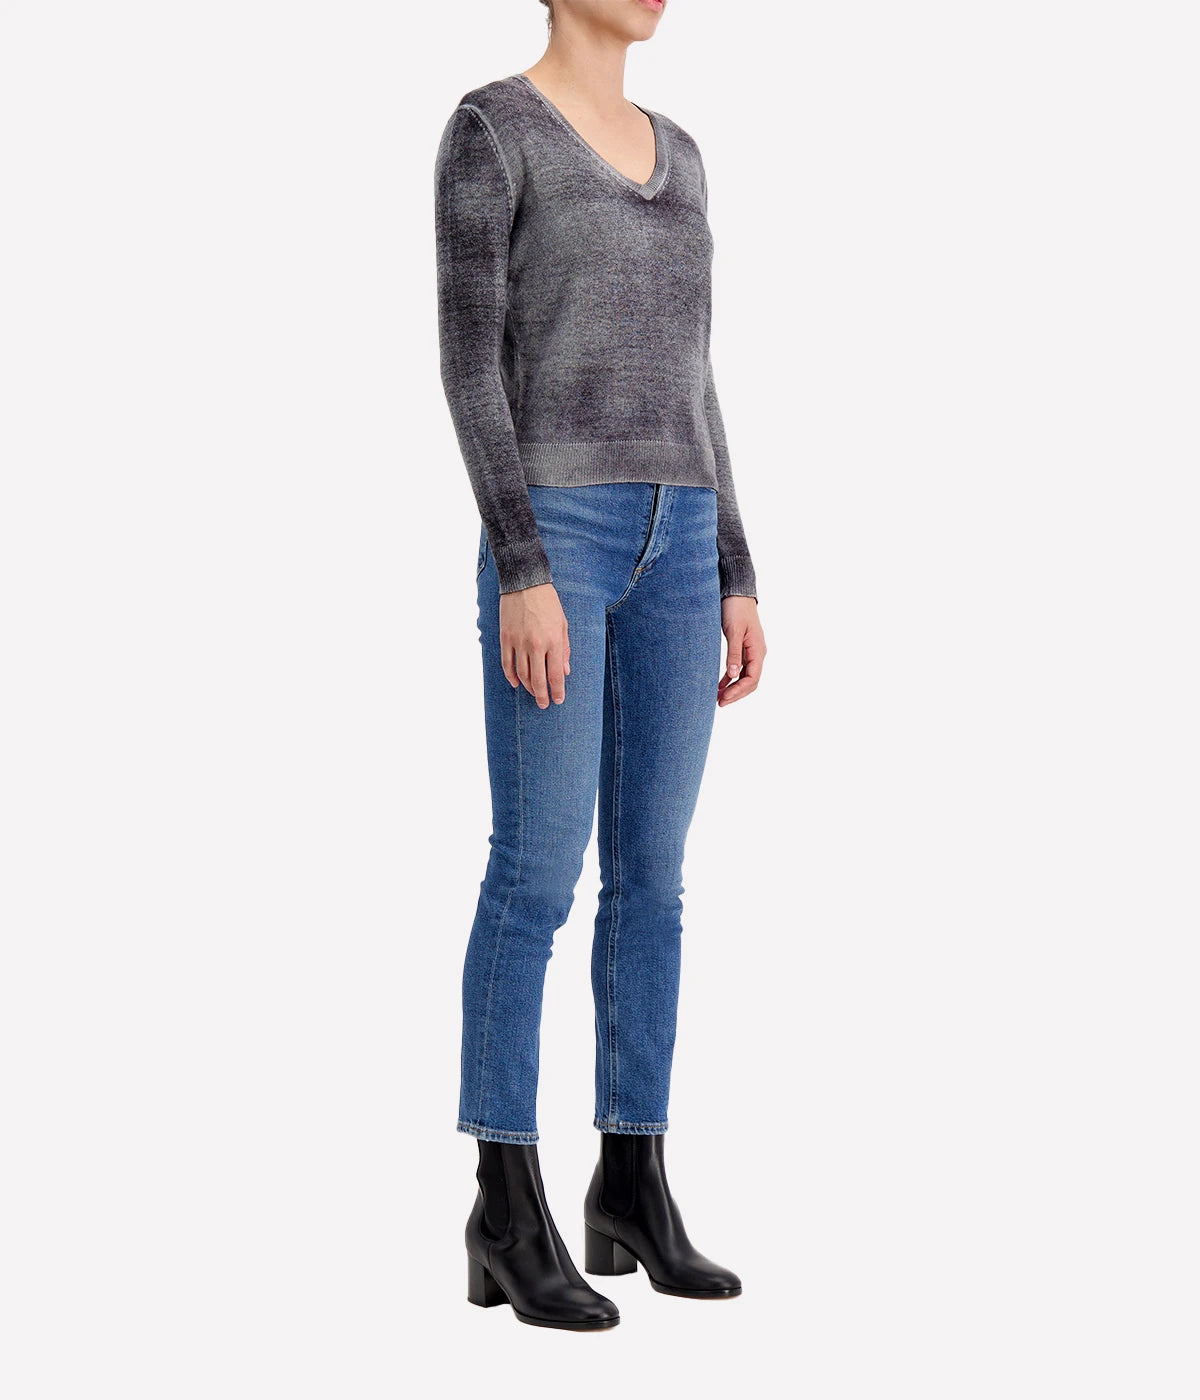 Light Cashmere Fitted V Neck Pullover in Huskey